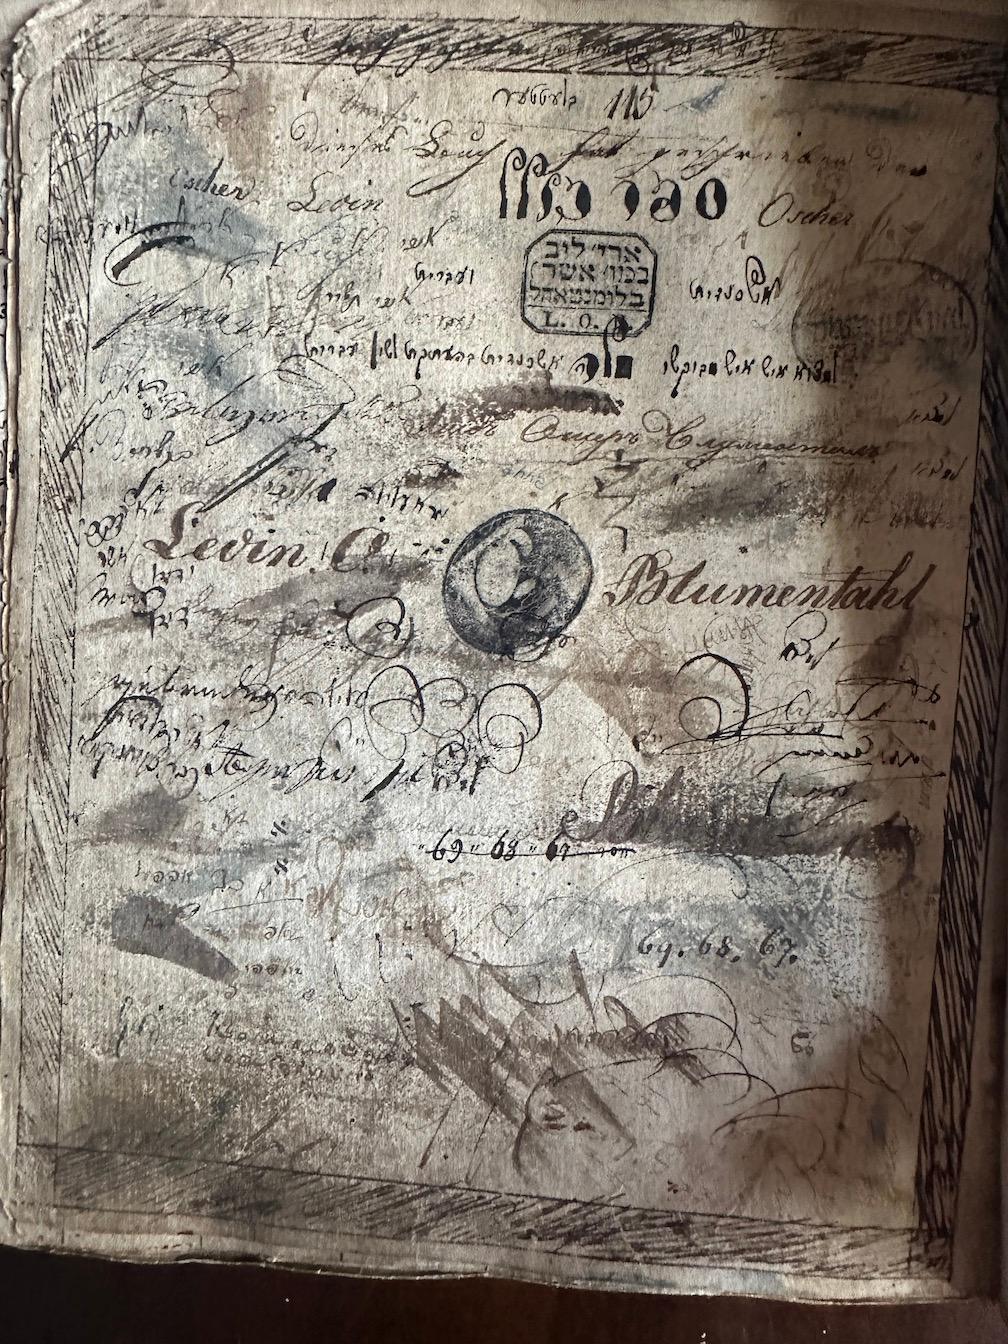 Exceedingly rare, one-of-a-kind handwritten Jewish calendrical manuscript from Władysławowie, 1837.

This book belongs in a museum.

Rebound beautifully by James MacDonald & Co.  Photos are the actual photos of the book.  See all photos.



The